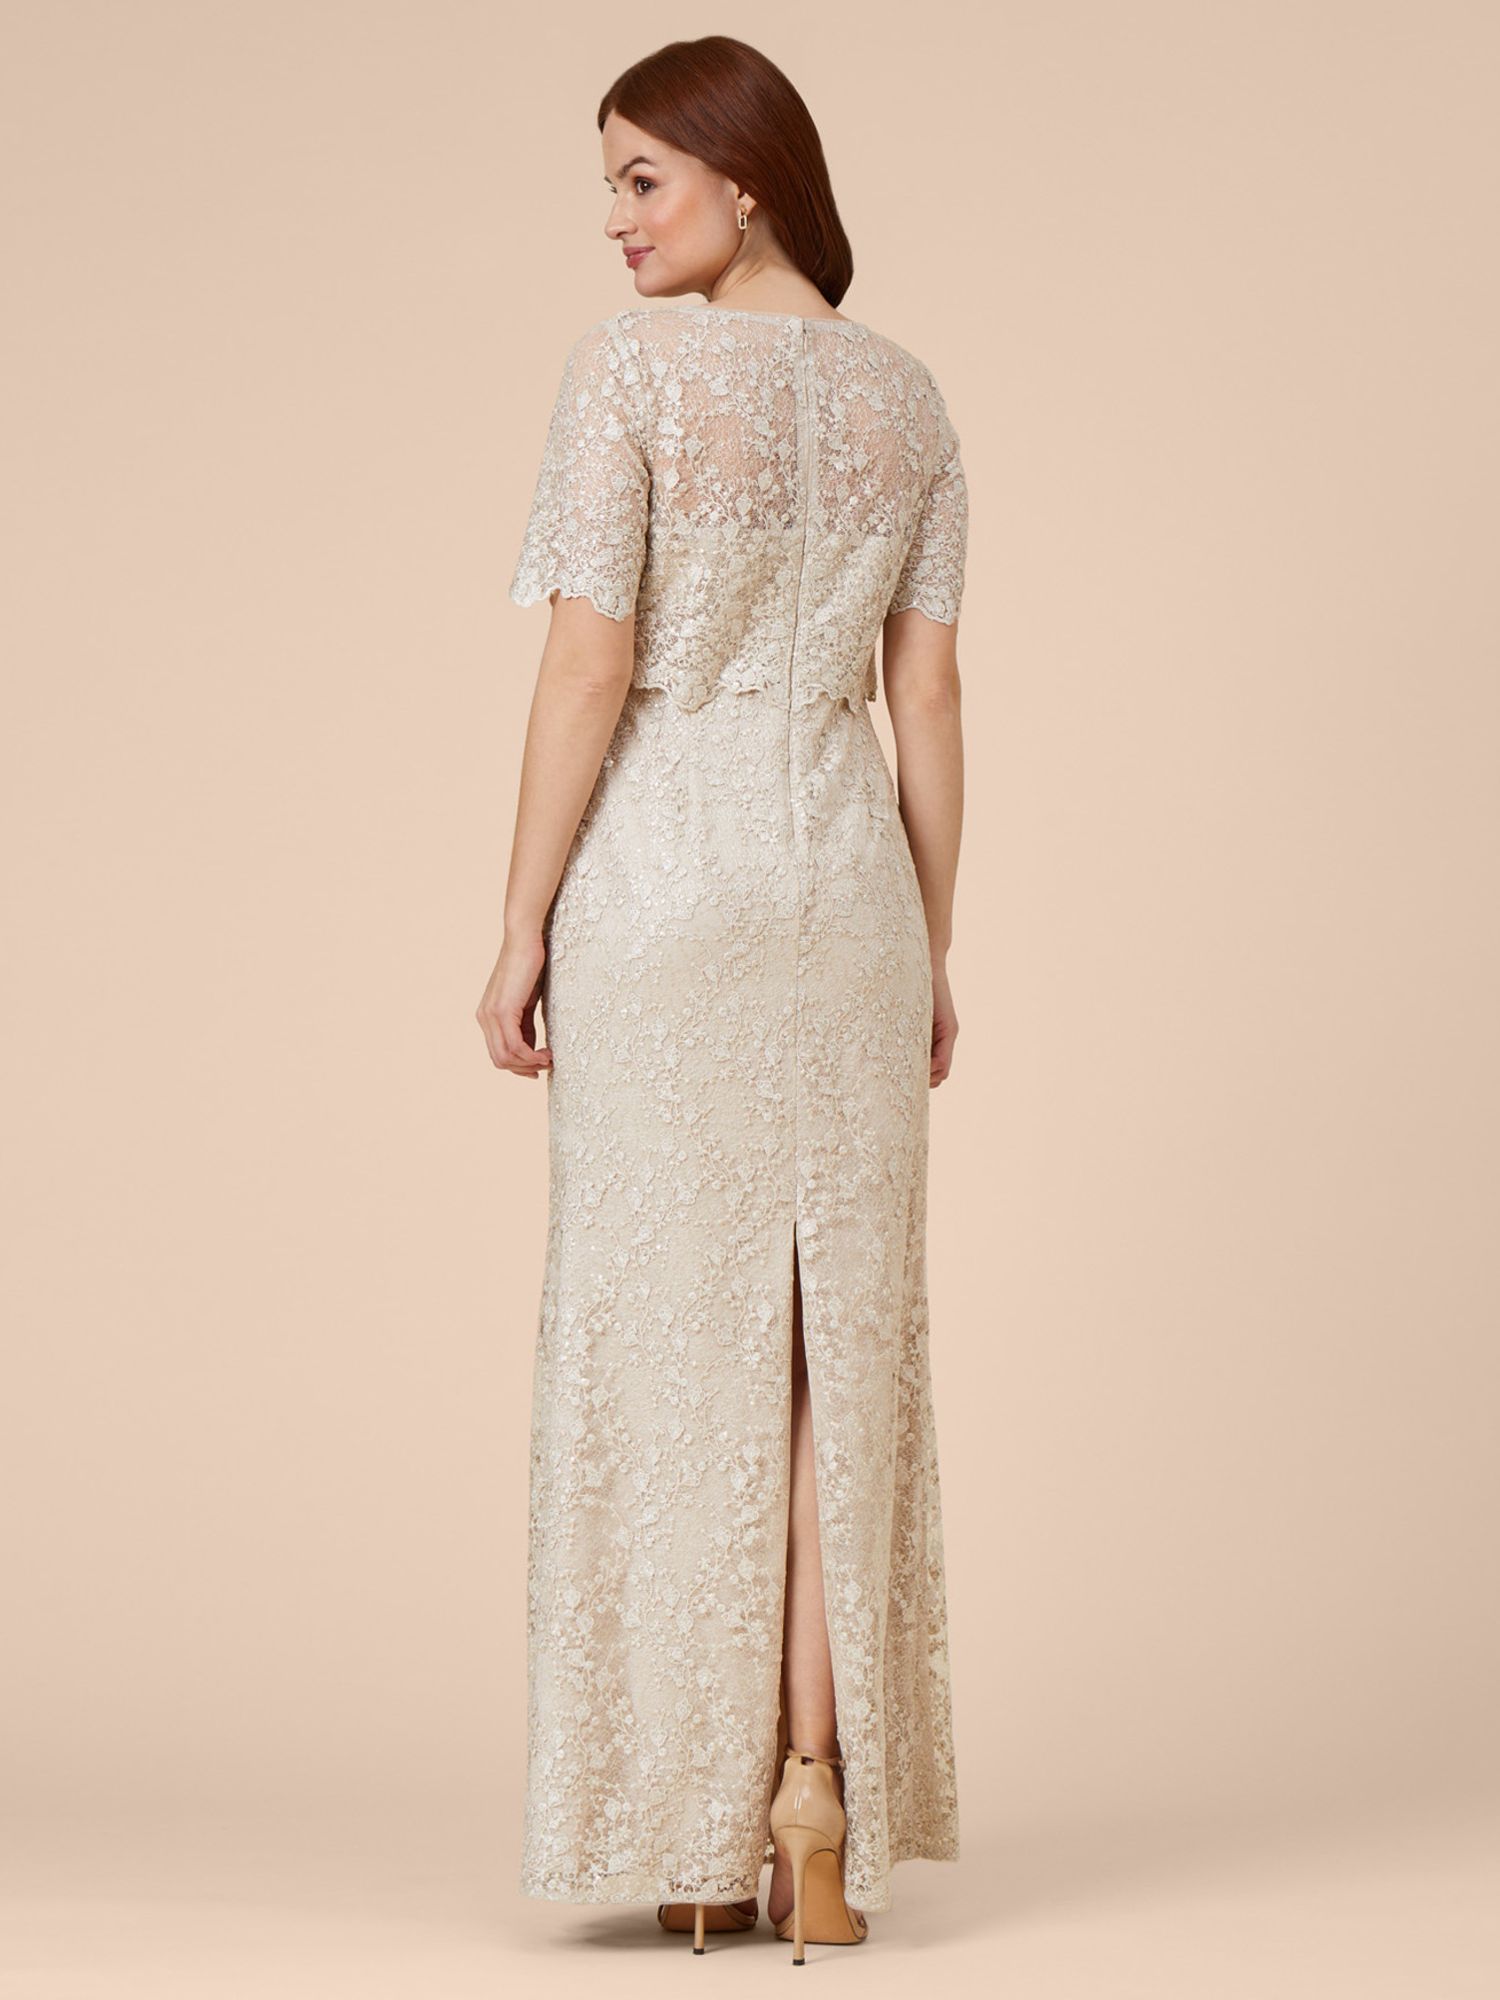 Buy Adrianna Papell Sequin Guipure Popover Gown, Biscotti Online at johnlewis.com